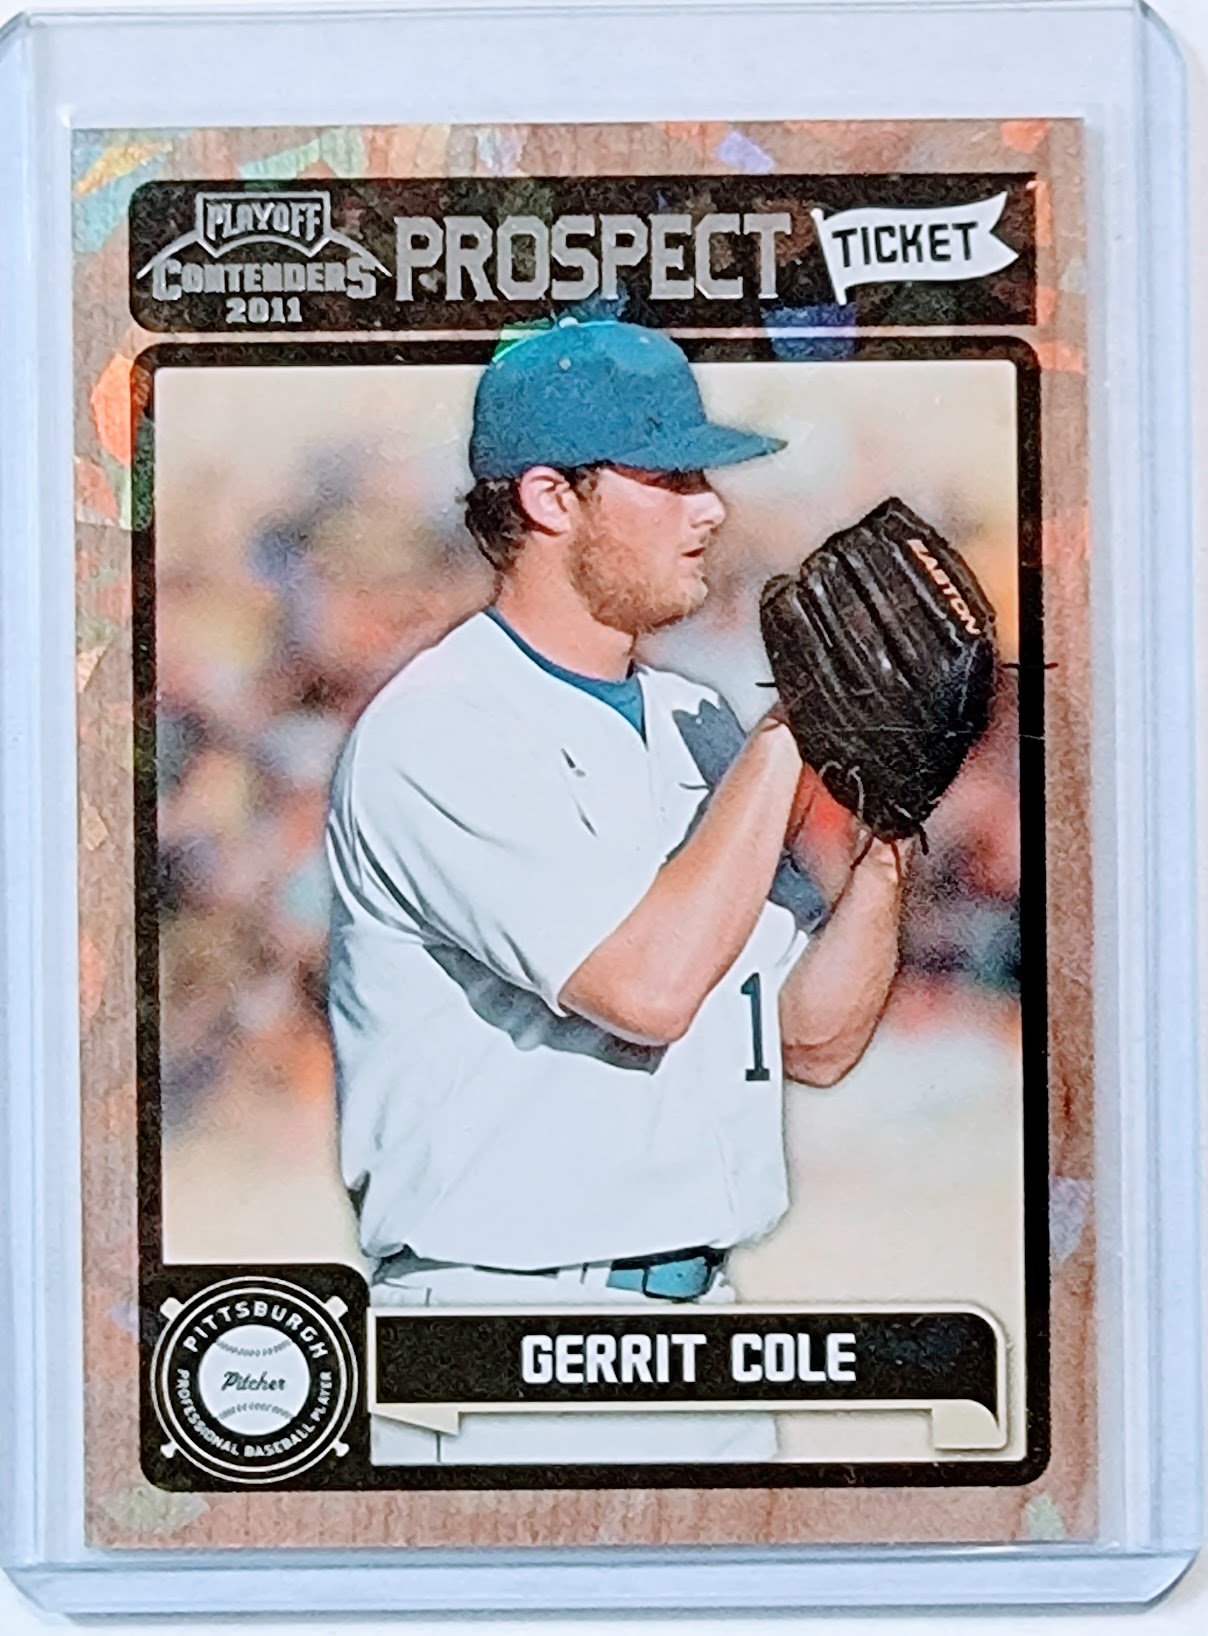 2011 Panini Playoff Contenders Gerrit Cole Prospect Ticket Baseball Trading Card TPTV simple Xclusive Collectibles   